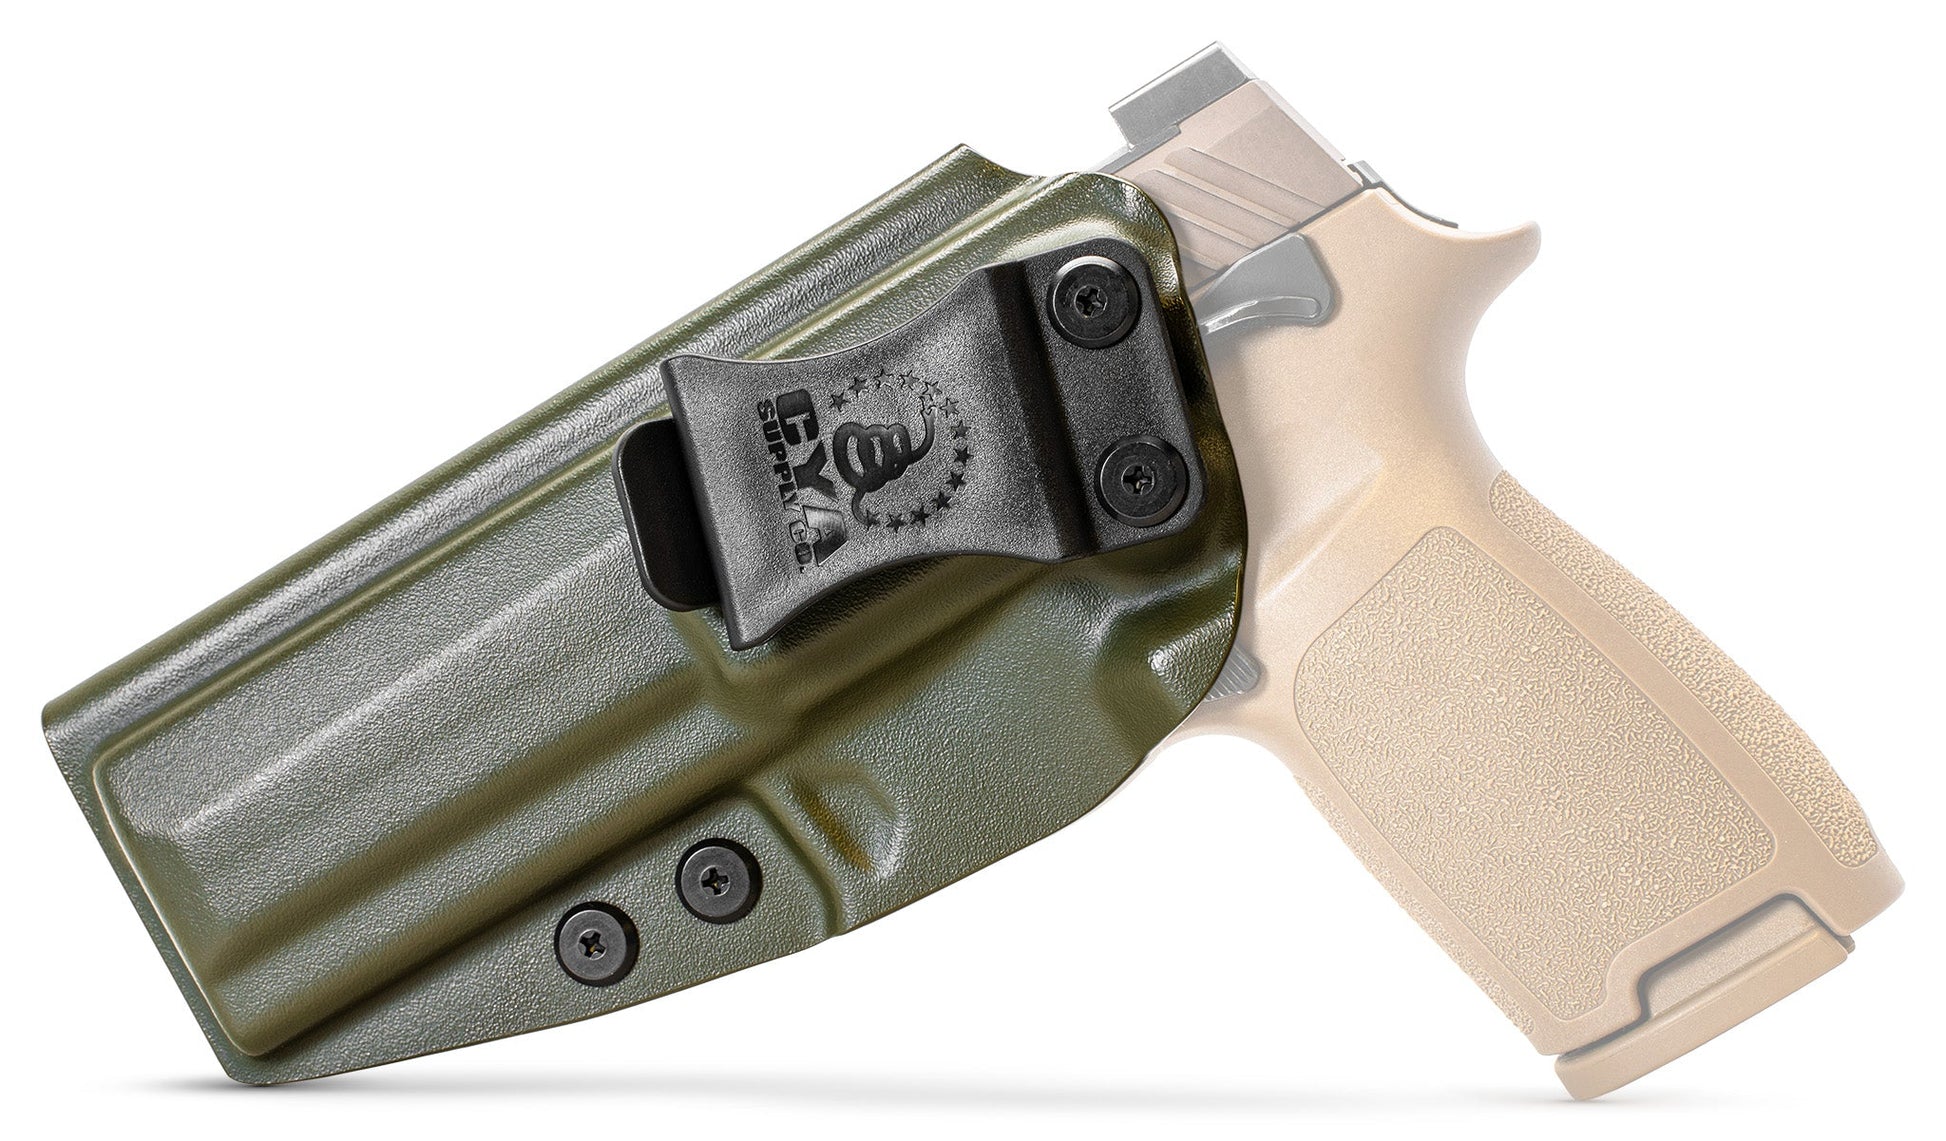 CYA Full size Holster in od green with a black clip on a tan sig sauer p320 handgun